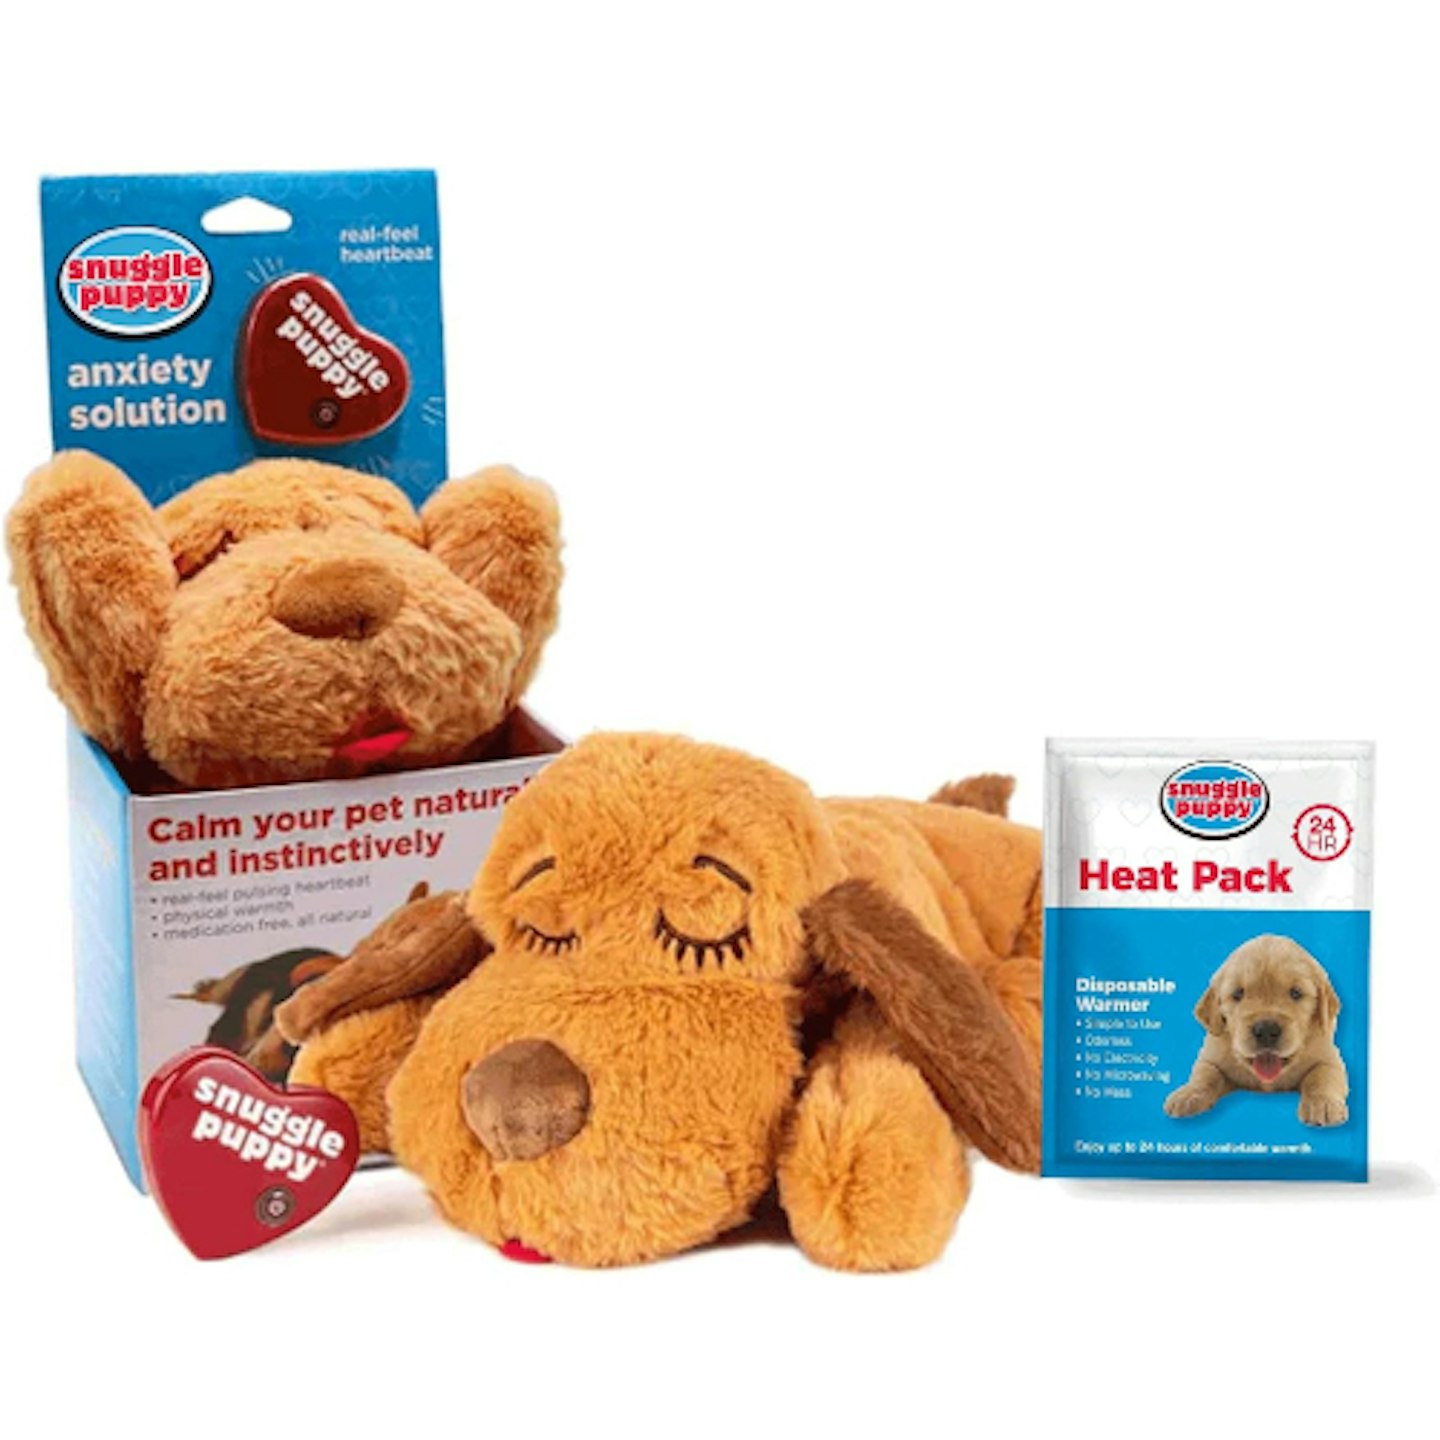 Snuggle Puppy heartbeat toy